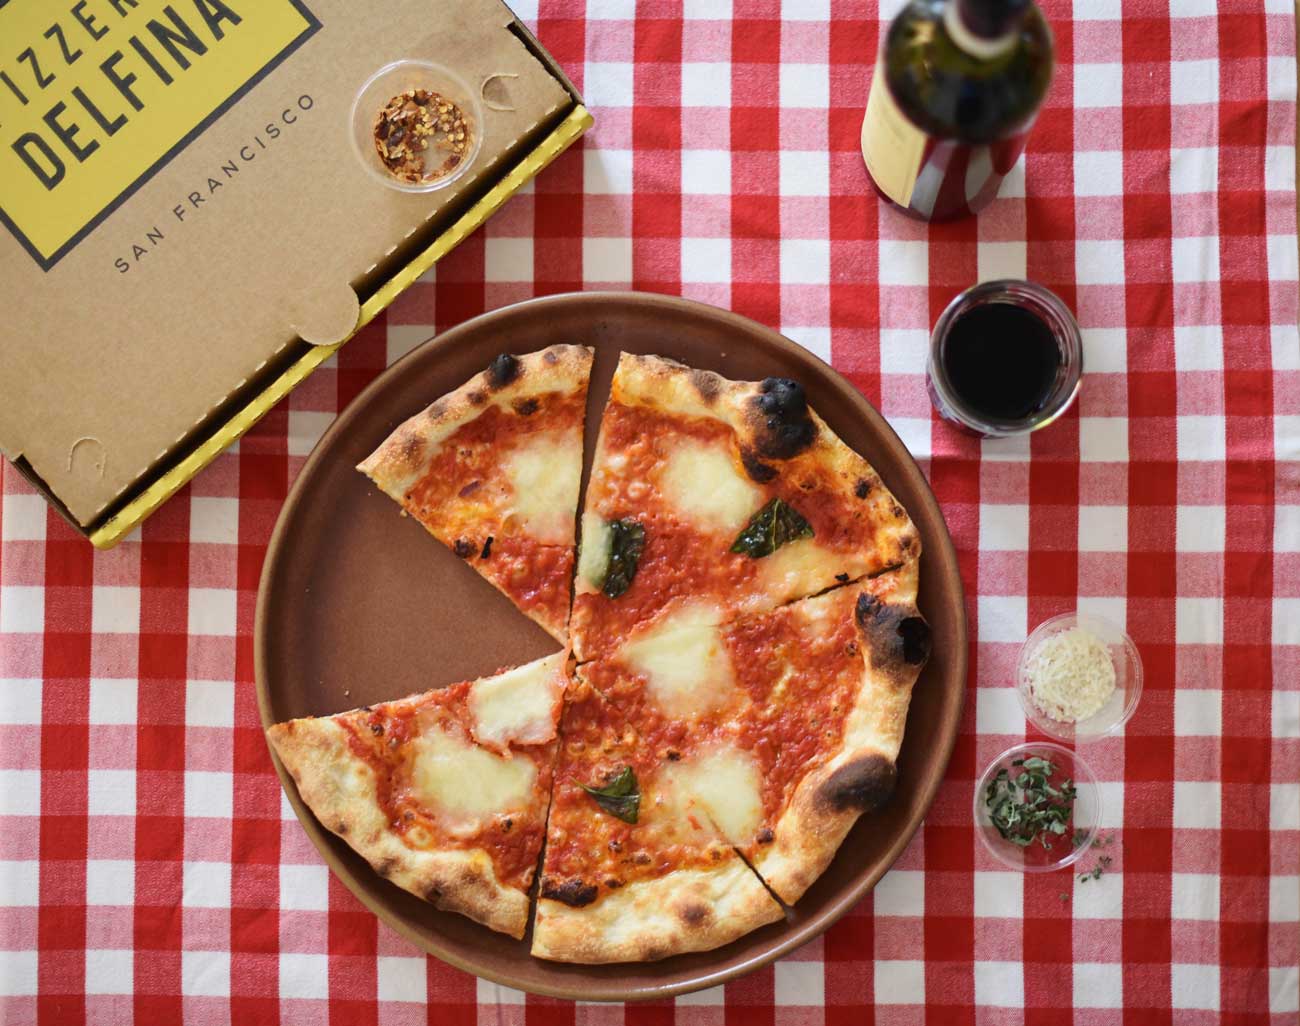 The class margherita pizza from Pizzeria Delfina - perfect with a glass of wine.